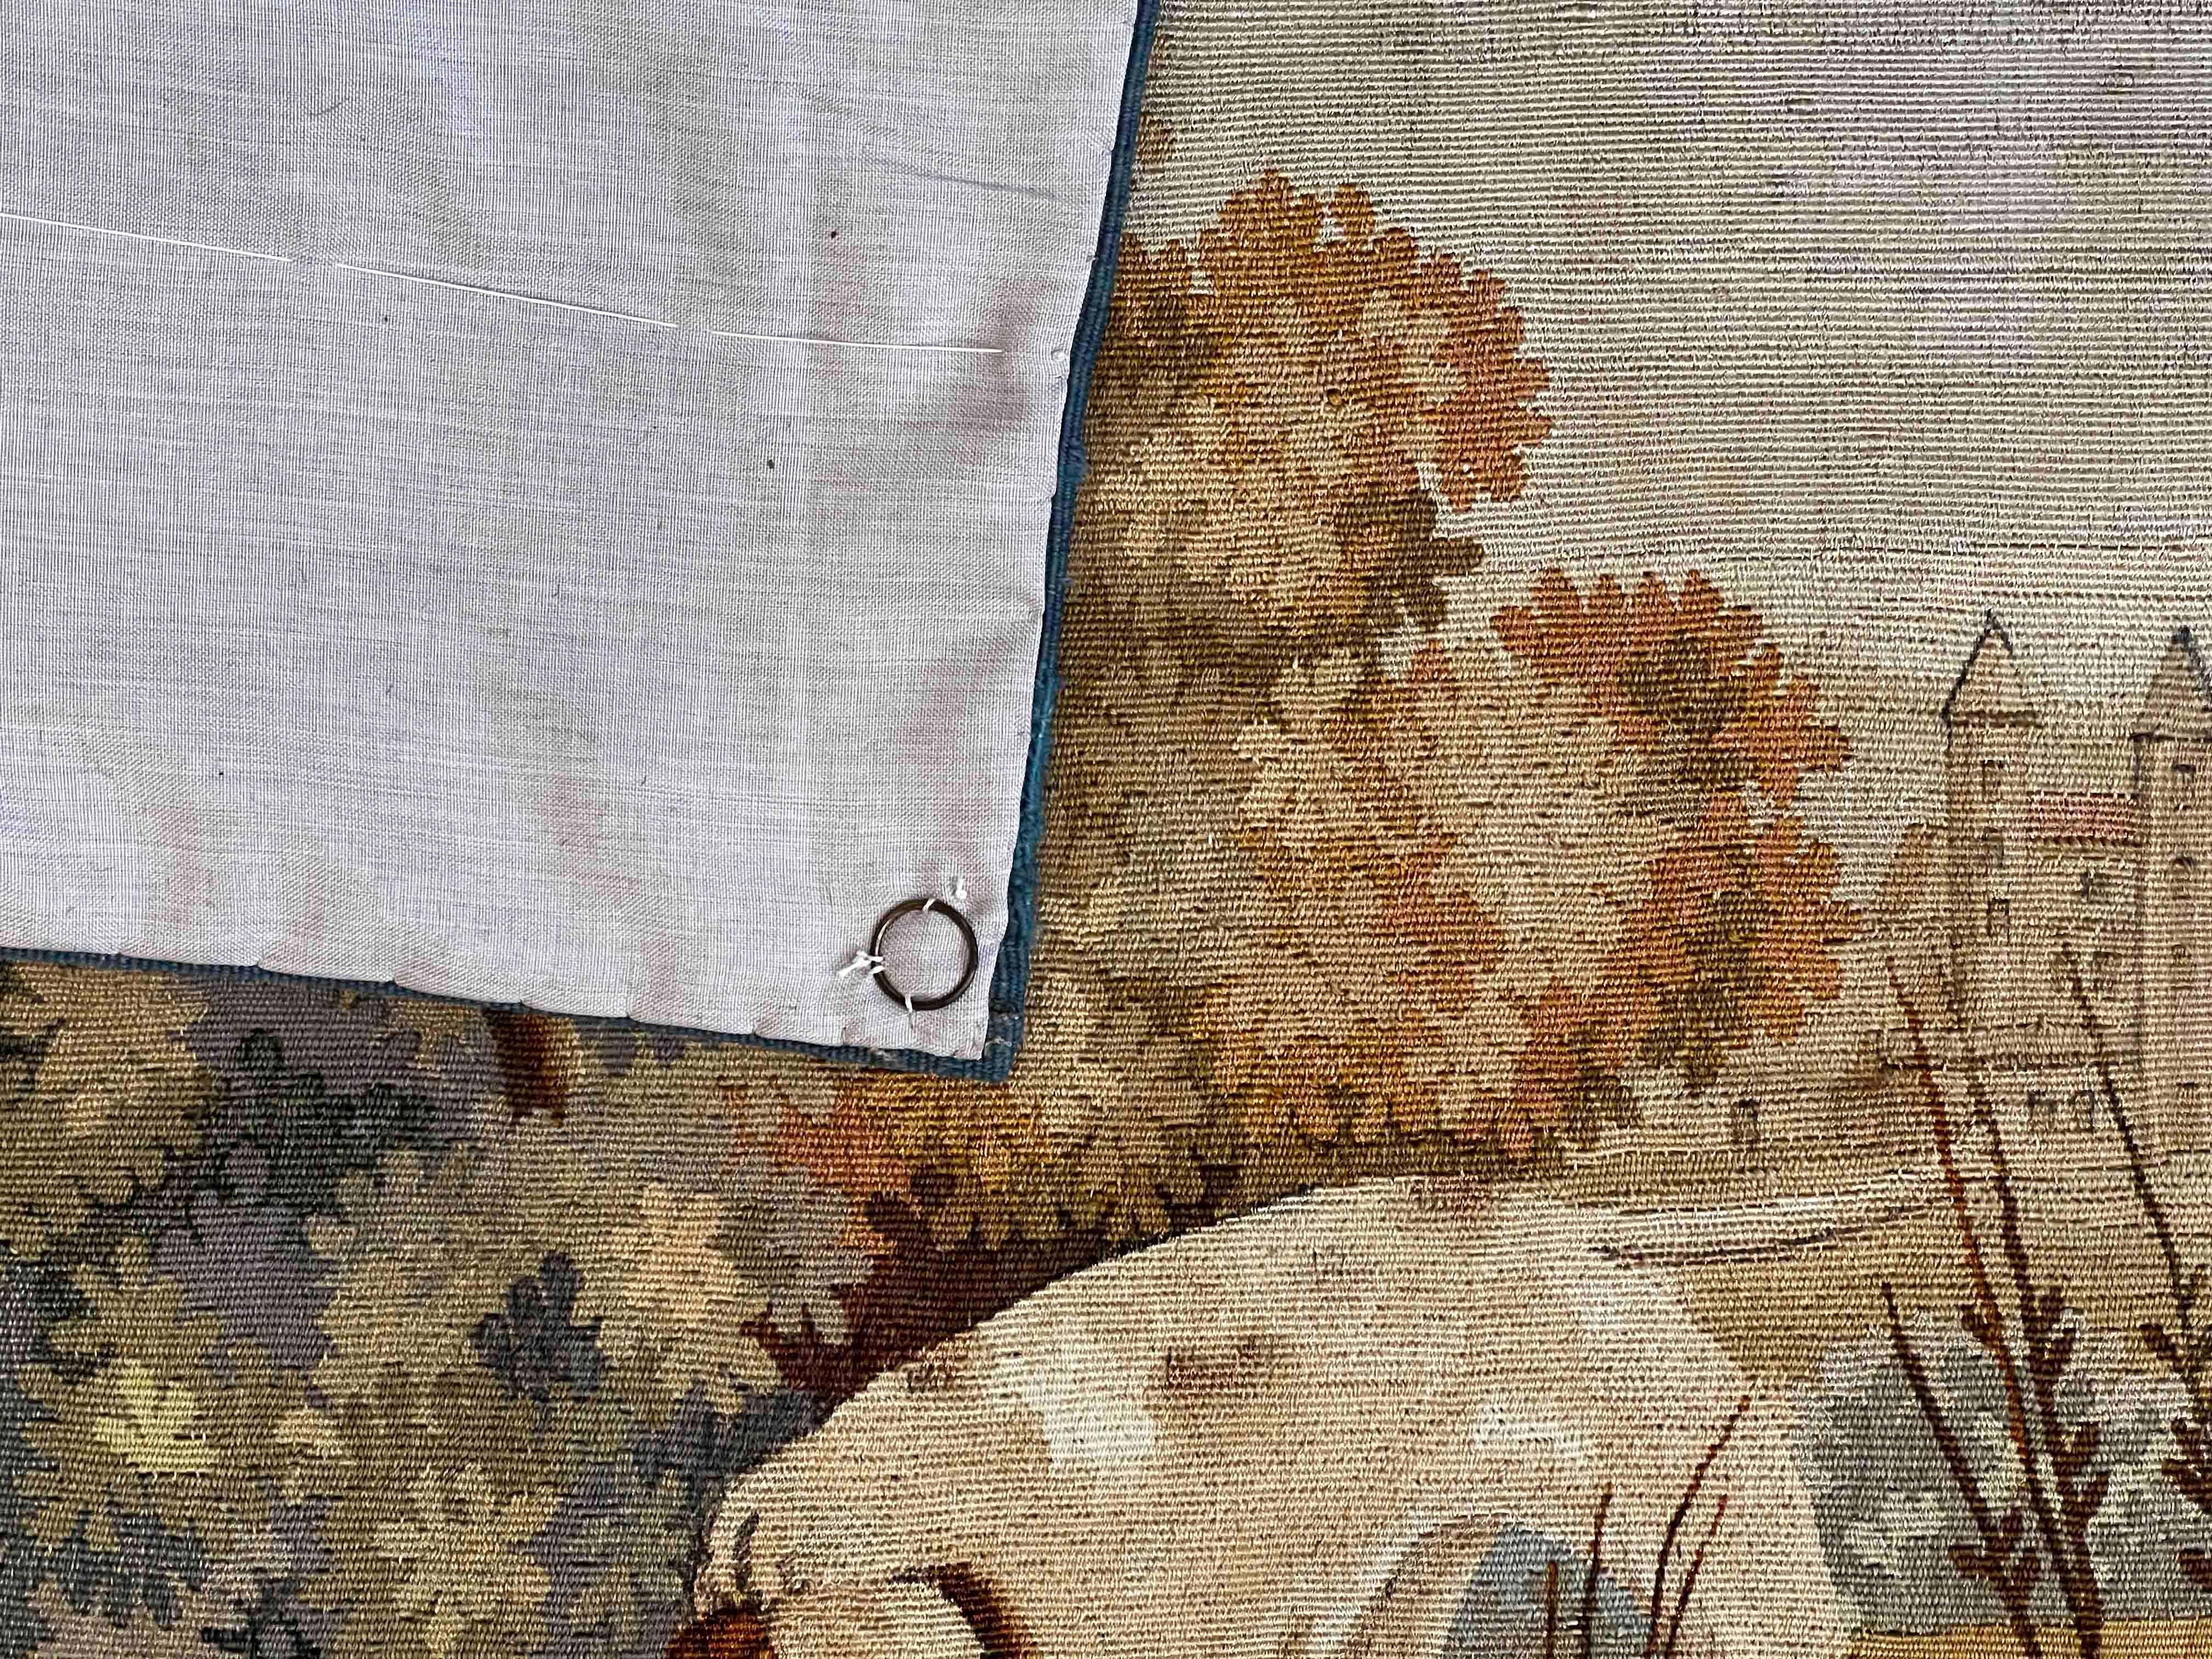 Late 19th Century French Aubusson Tapestry 19th century - N° 1127